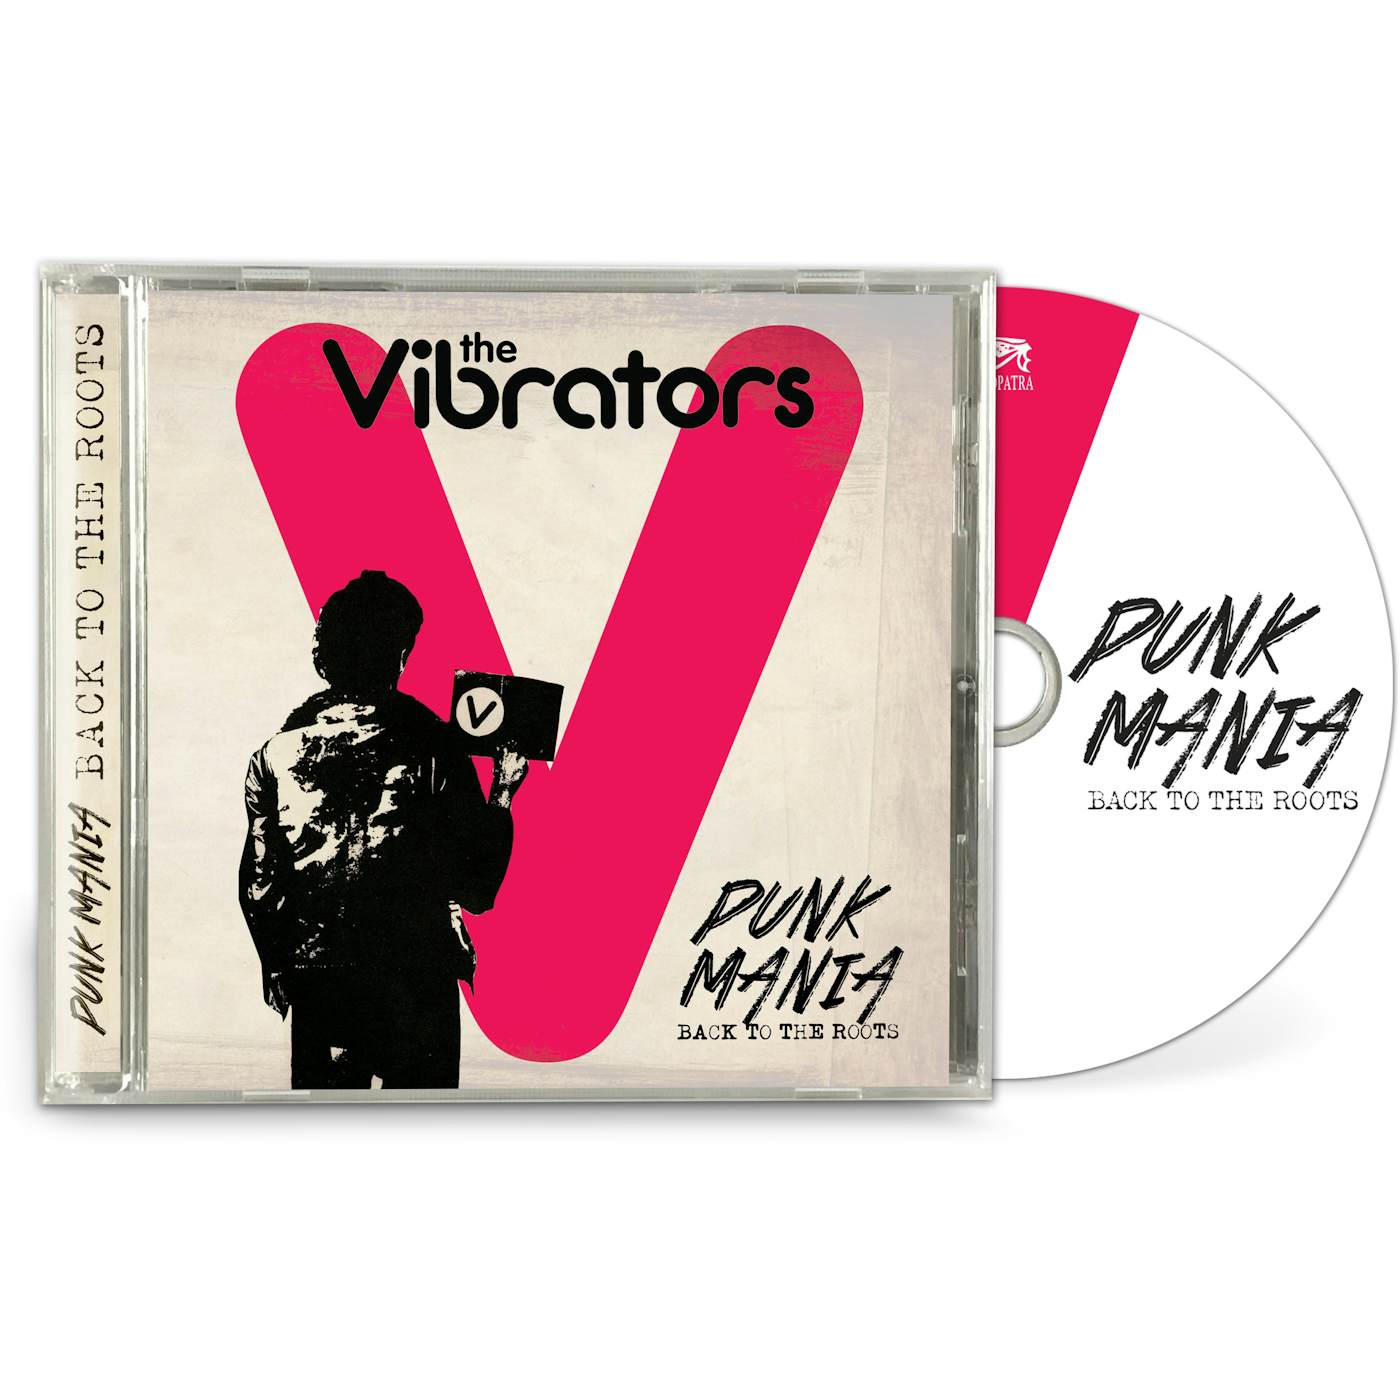 The Vibrators PUNK MANIA - BACK TO THE ROOTS CD